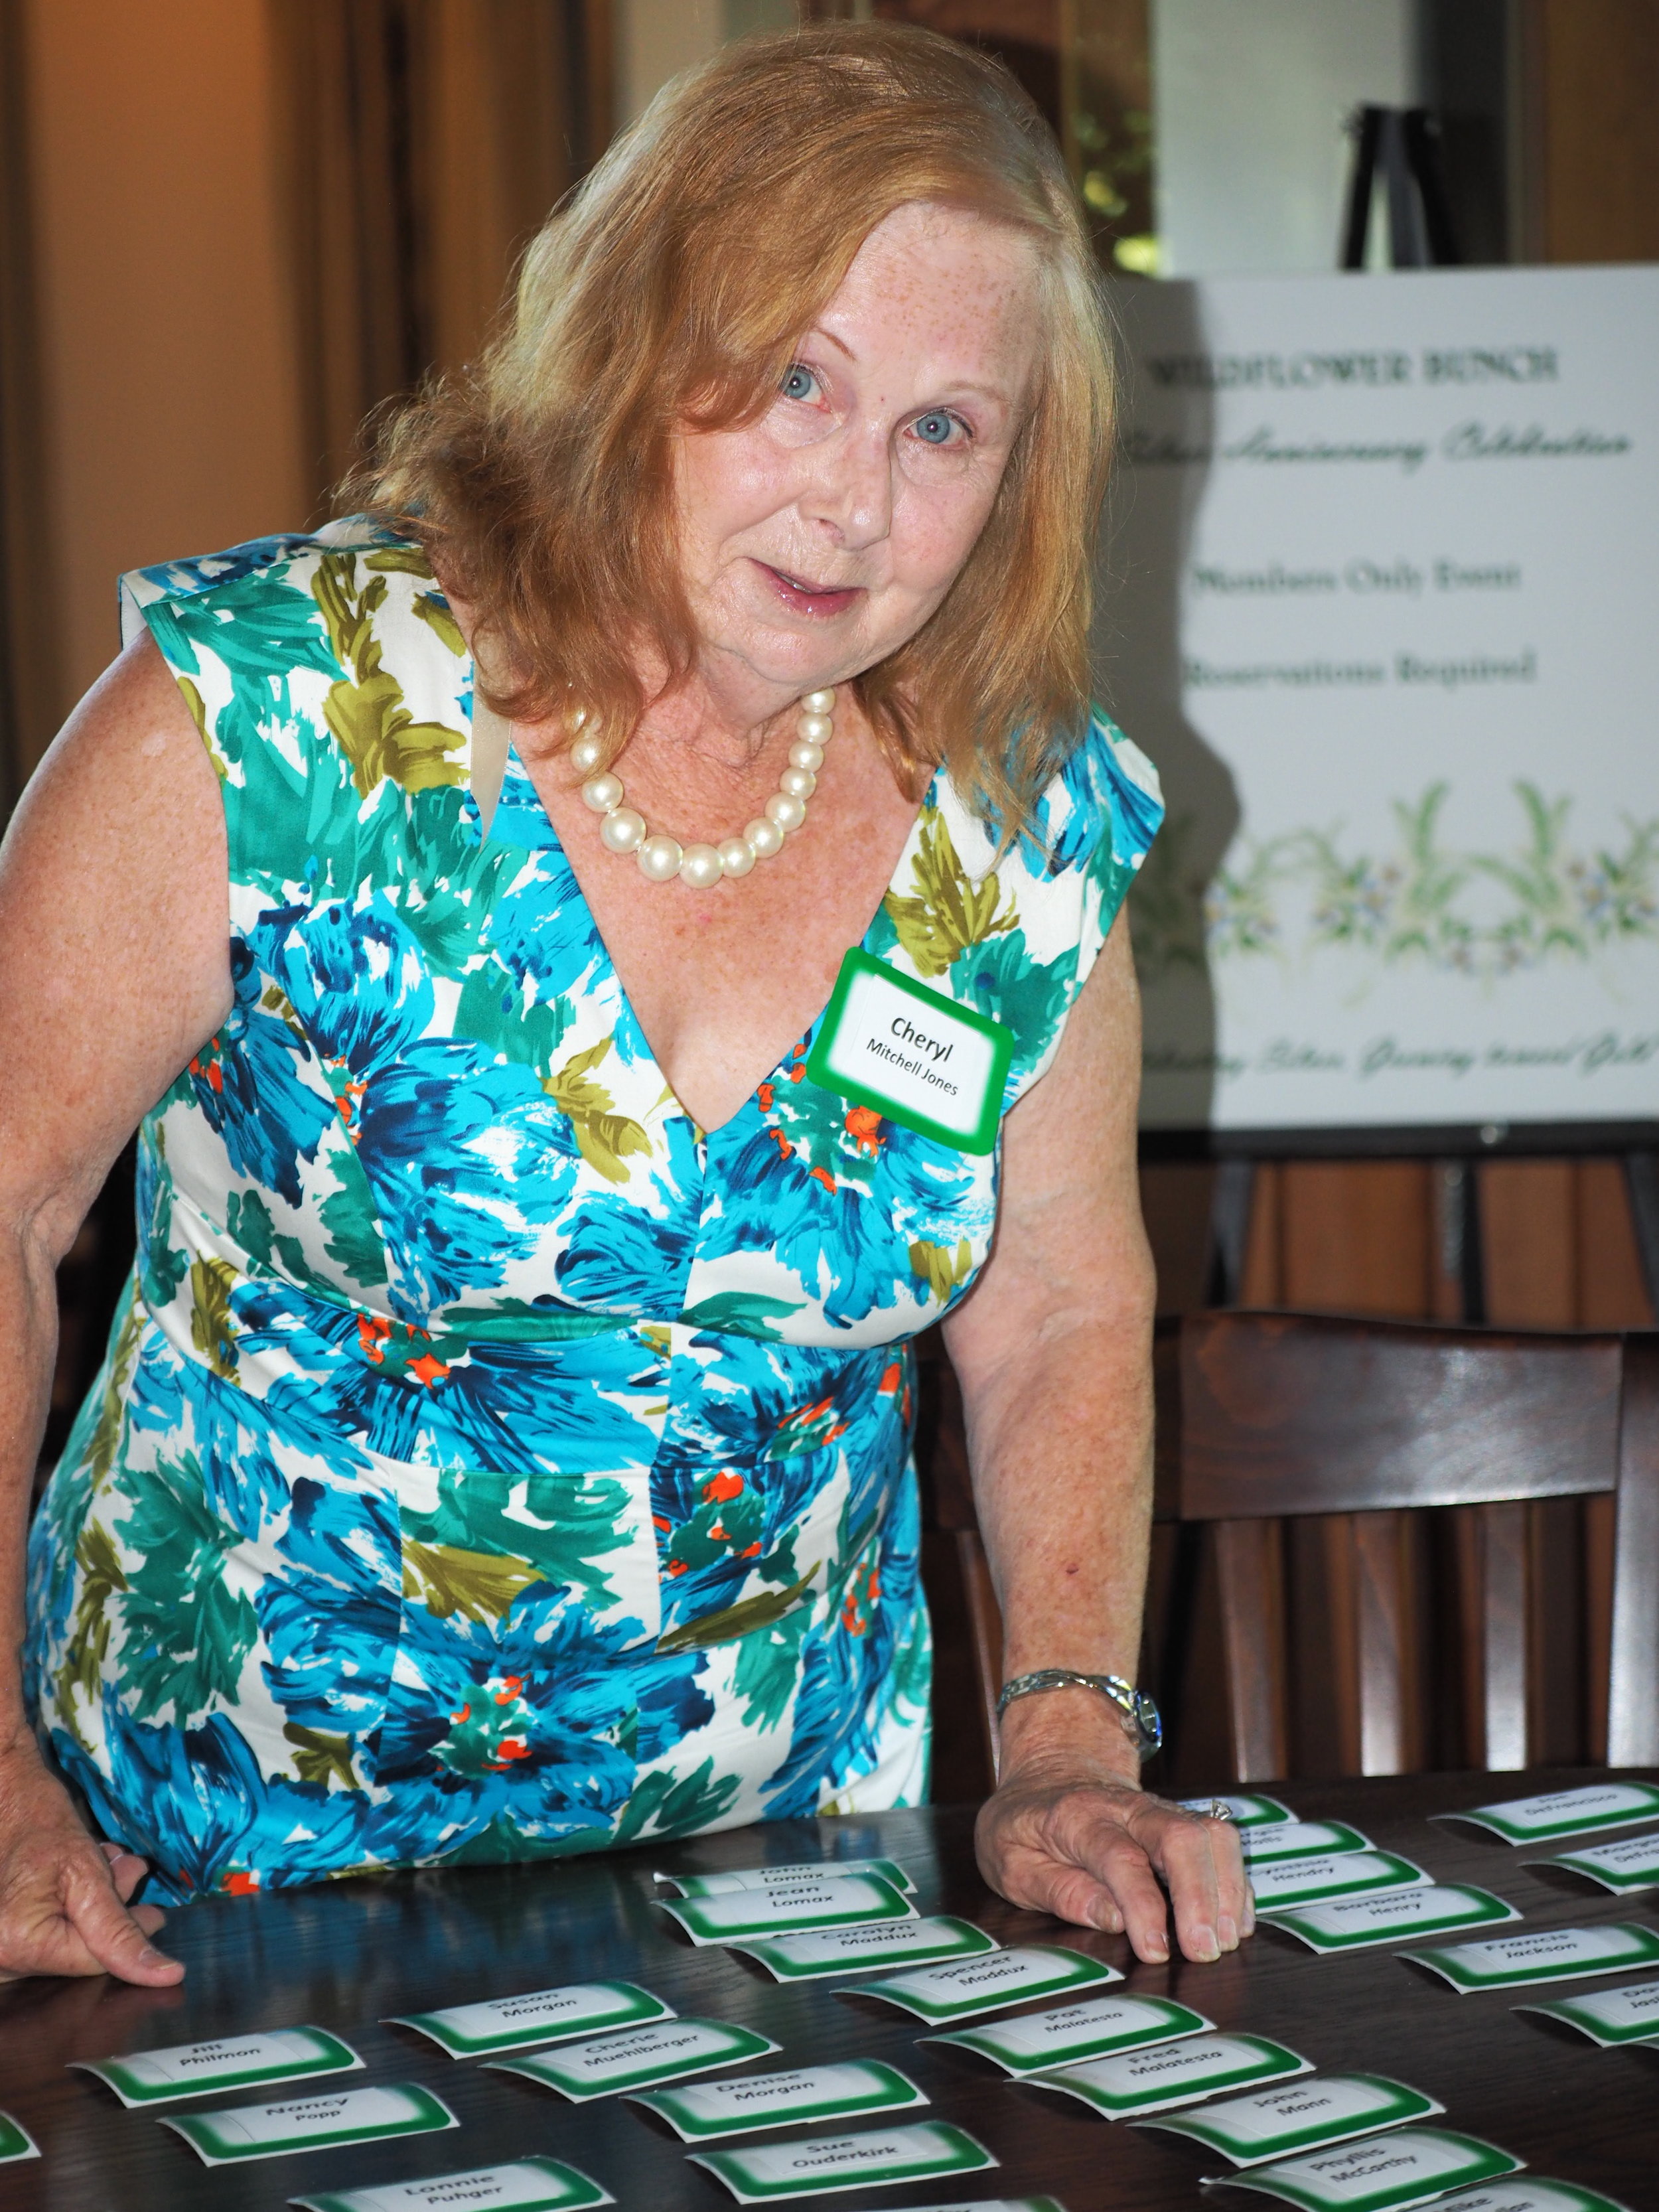 Cheryl Mitchell-Jones welcomed members and guests as they arrived.